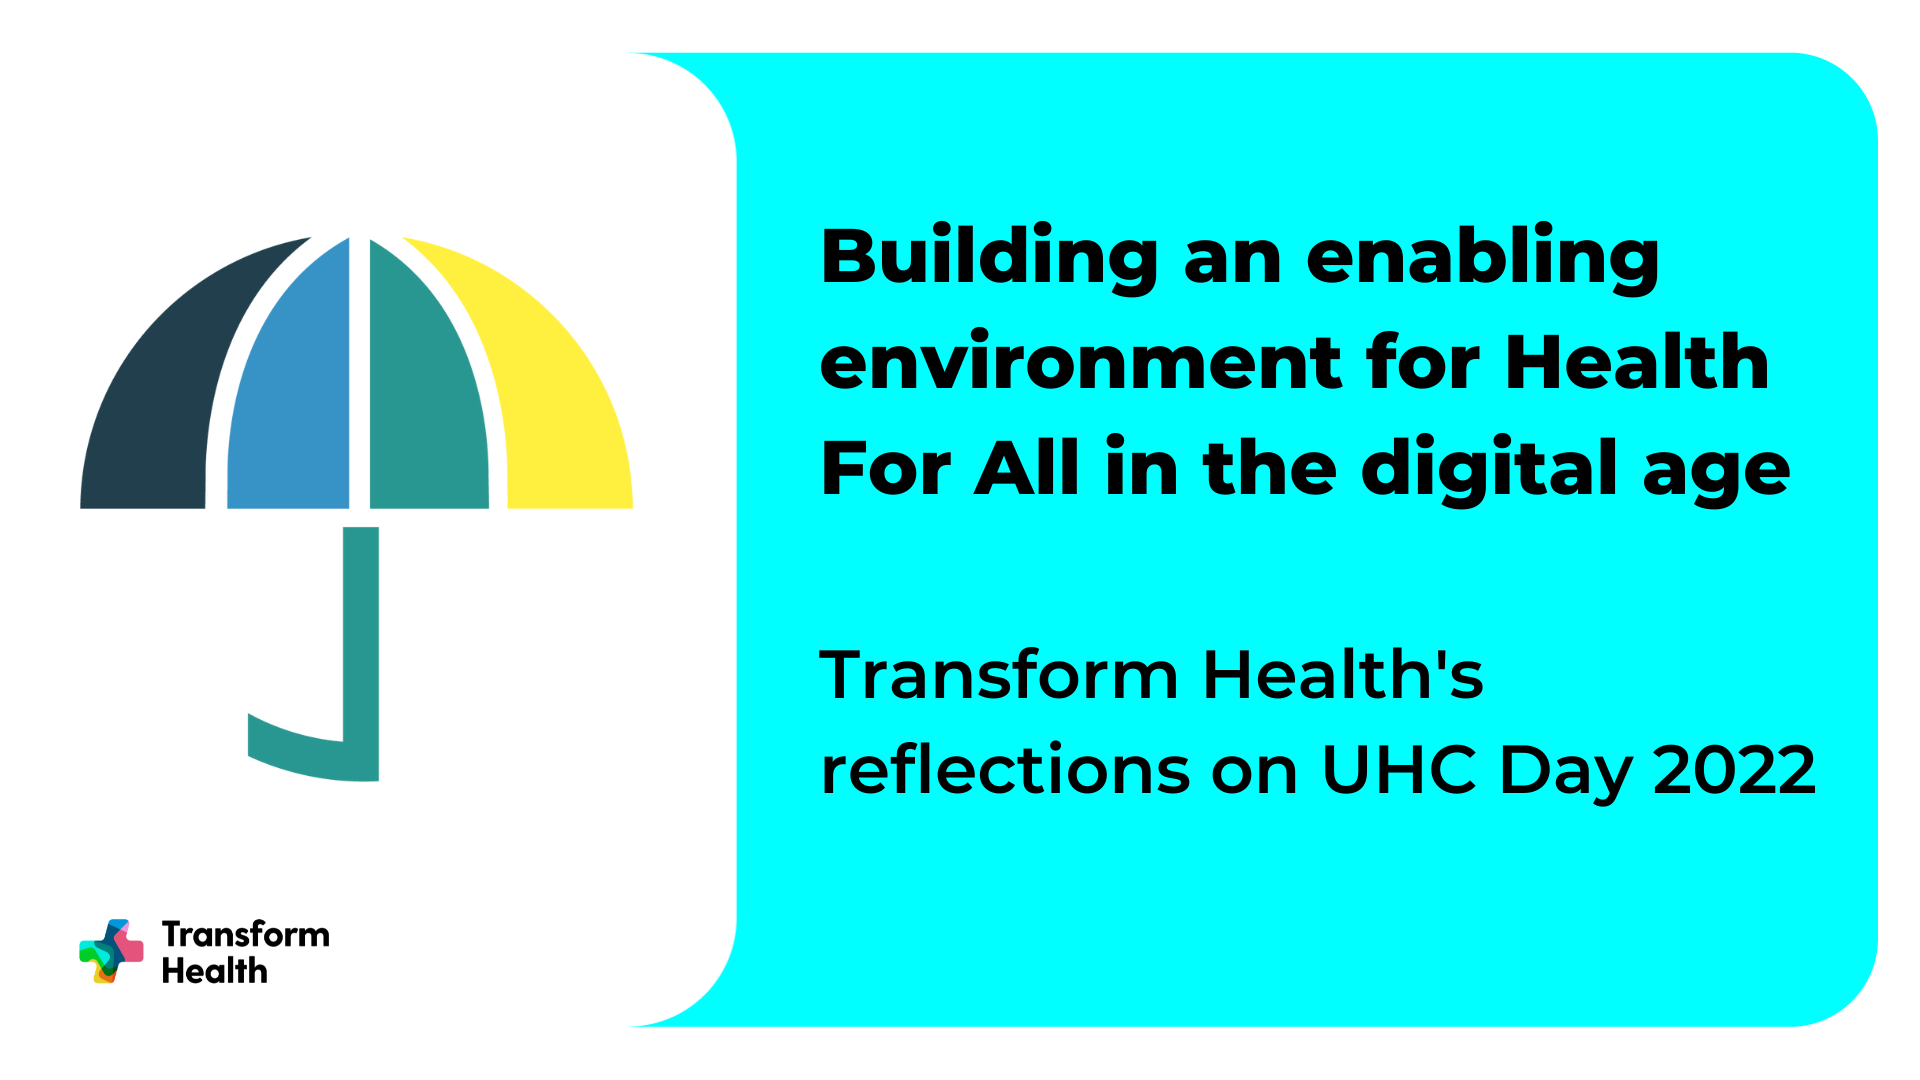 Building an enabling environment for Health For All in the digital age